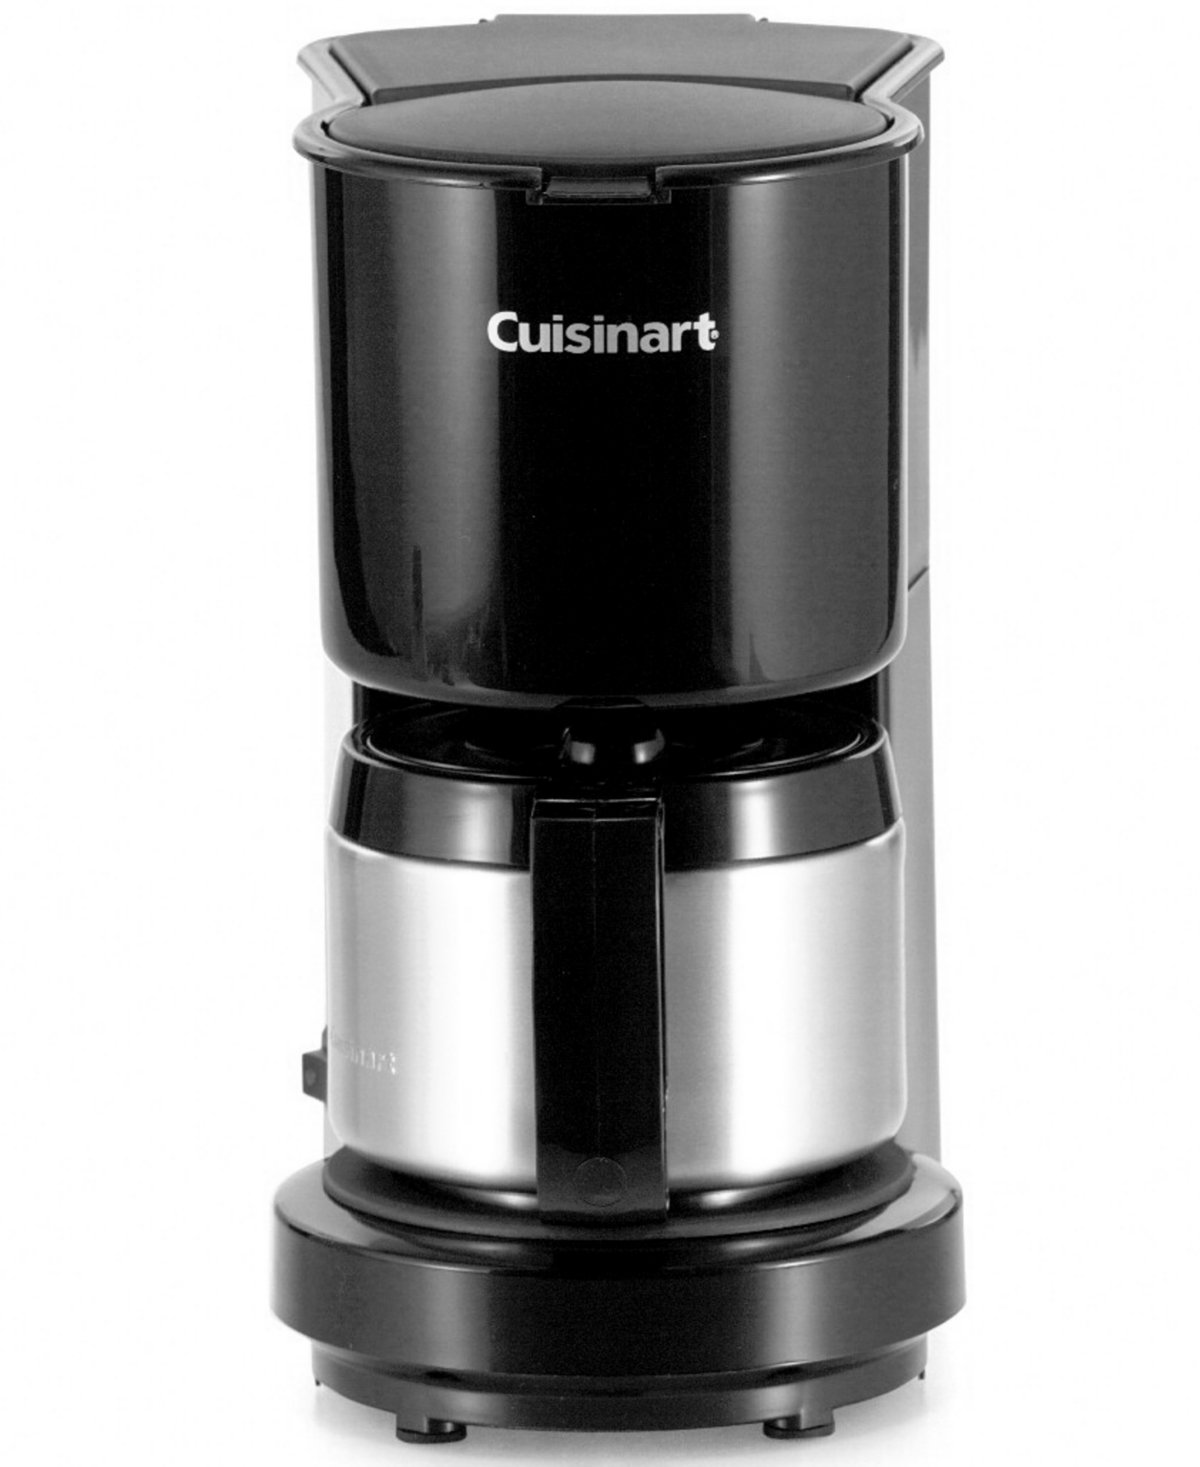 Cuisinart Dcc-450 4-Cup Coffee Maker